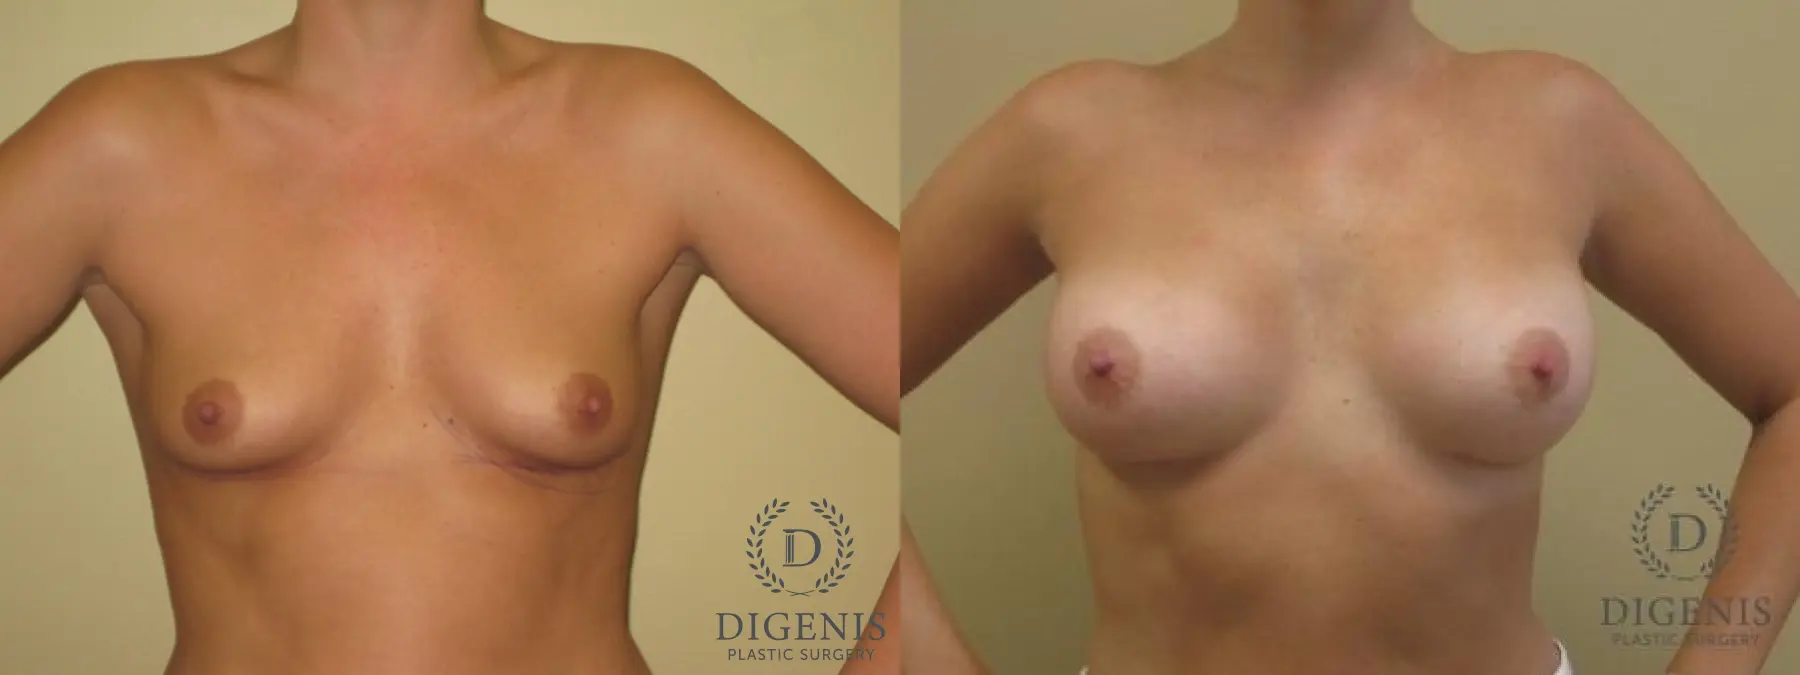 Breast Augmentation: Patient 5 - Before and After 1